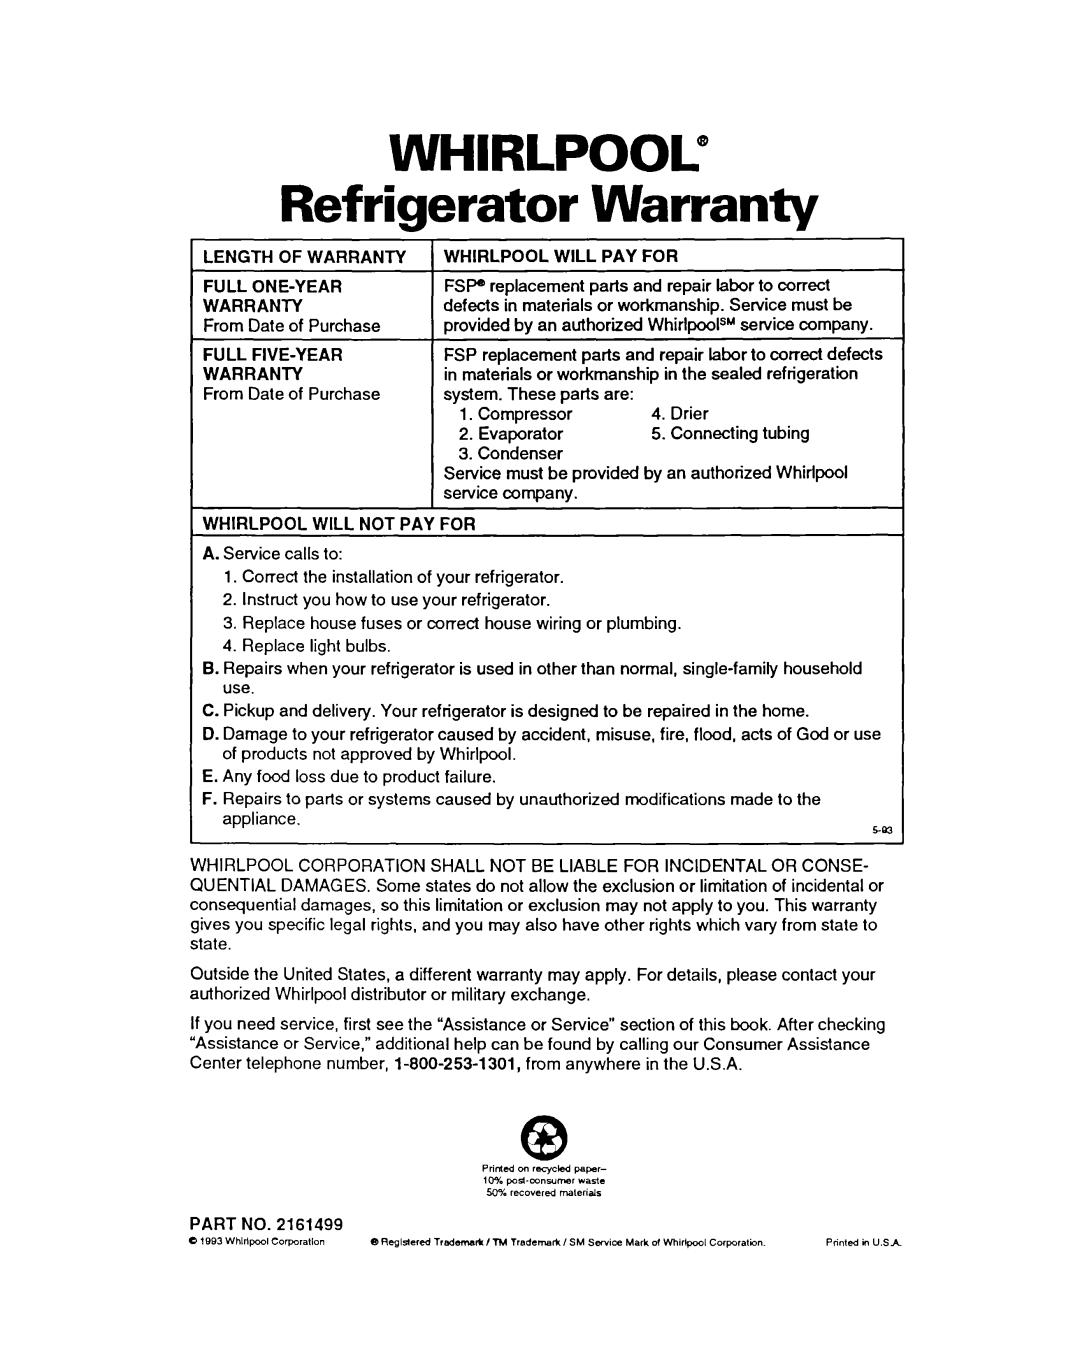 Whirlpool ED22PC important safety instructions WHIRLPOOL@ Refrigerator Warranty 